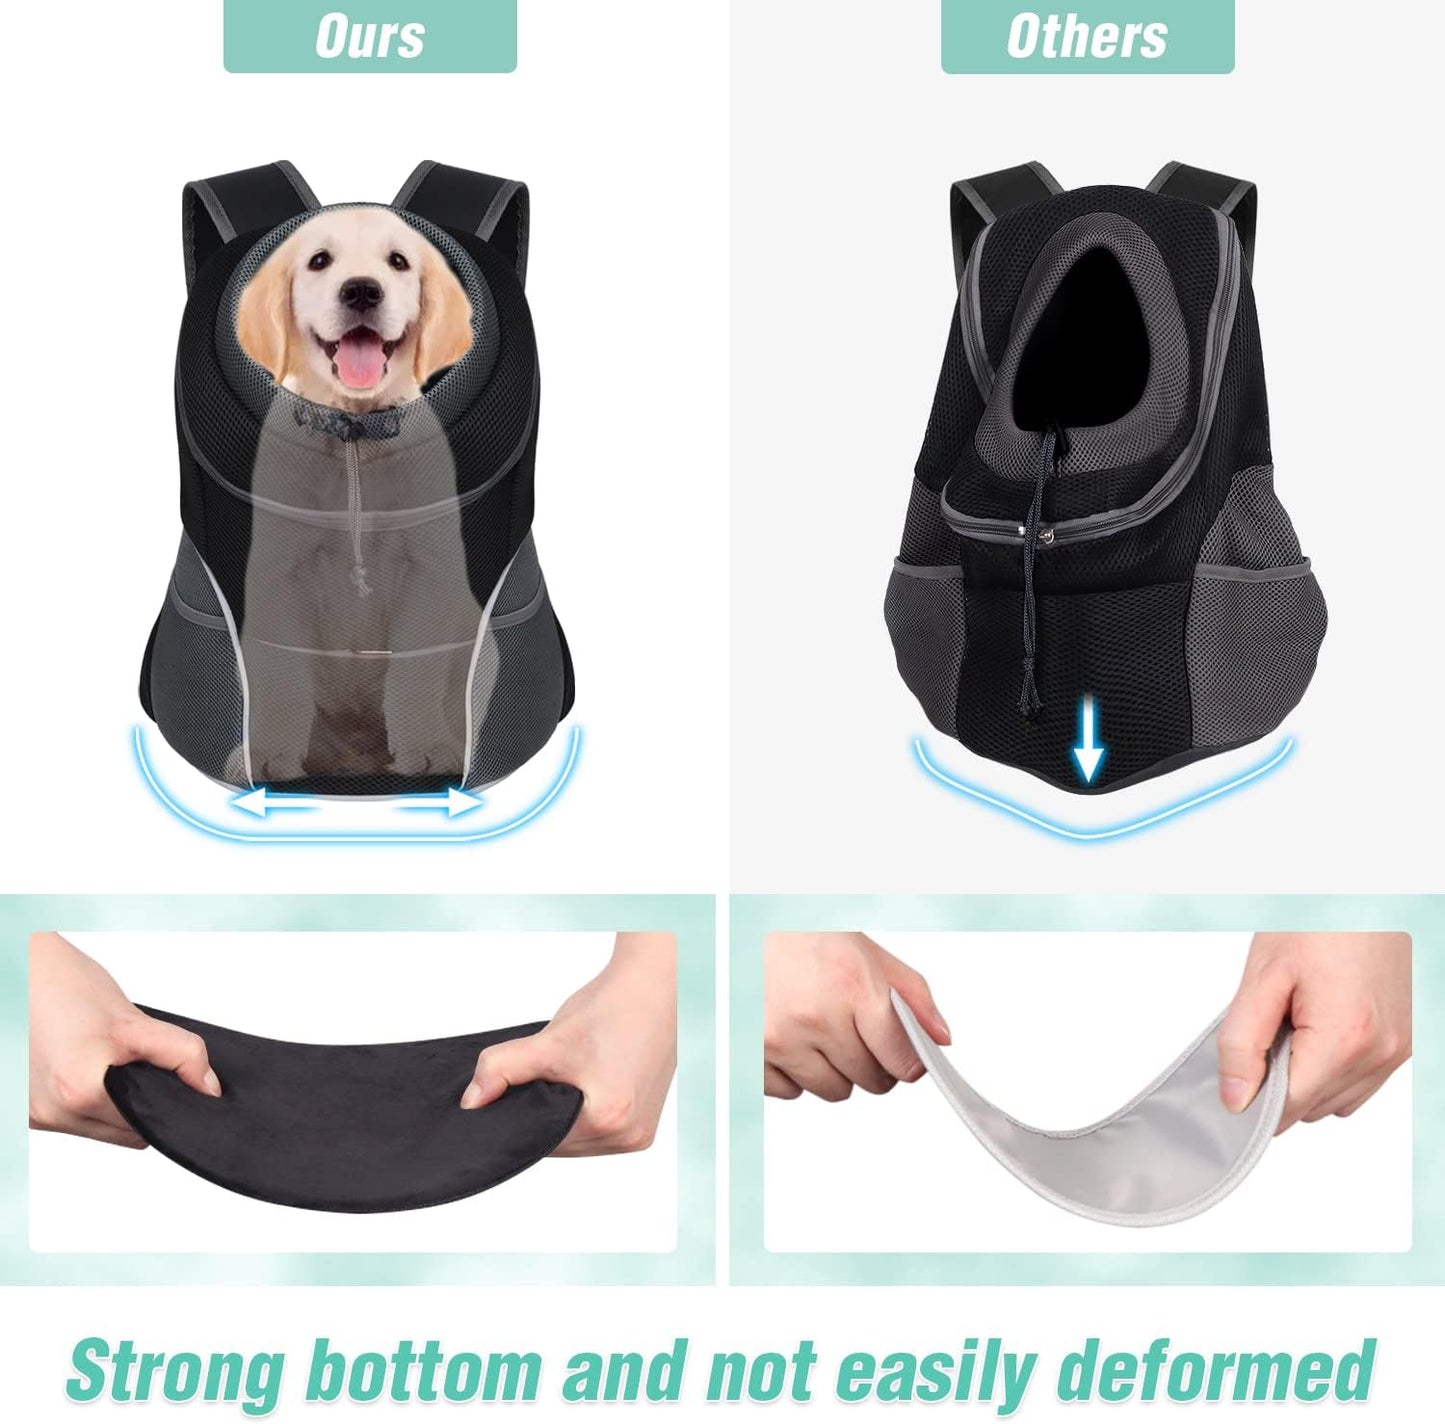 Head Out Dog Backpack Carrier Bag and Breathable Design - KIKA PETS